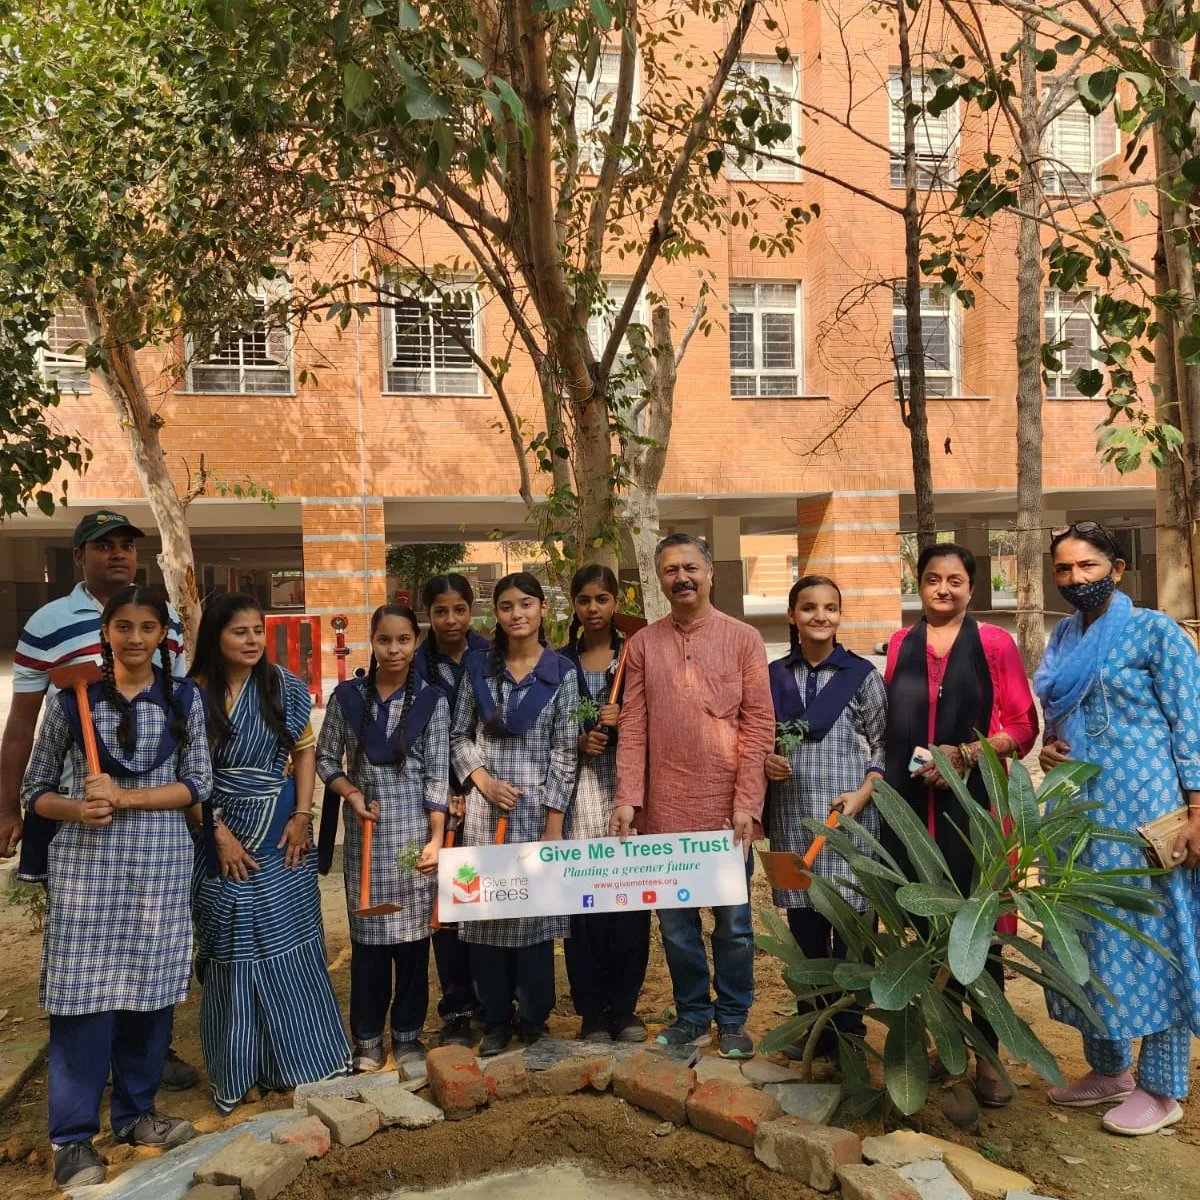 We planted #tree saplings with the children of Government Senior Secondary School in Uttam Nagar, Delhi. 

The #plantation concluded with an interactive session on the importance of trees and #biodiversity. 
Teach them young 💚 

#plantingtrees #natureeducation #greenlearning